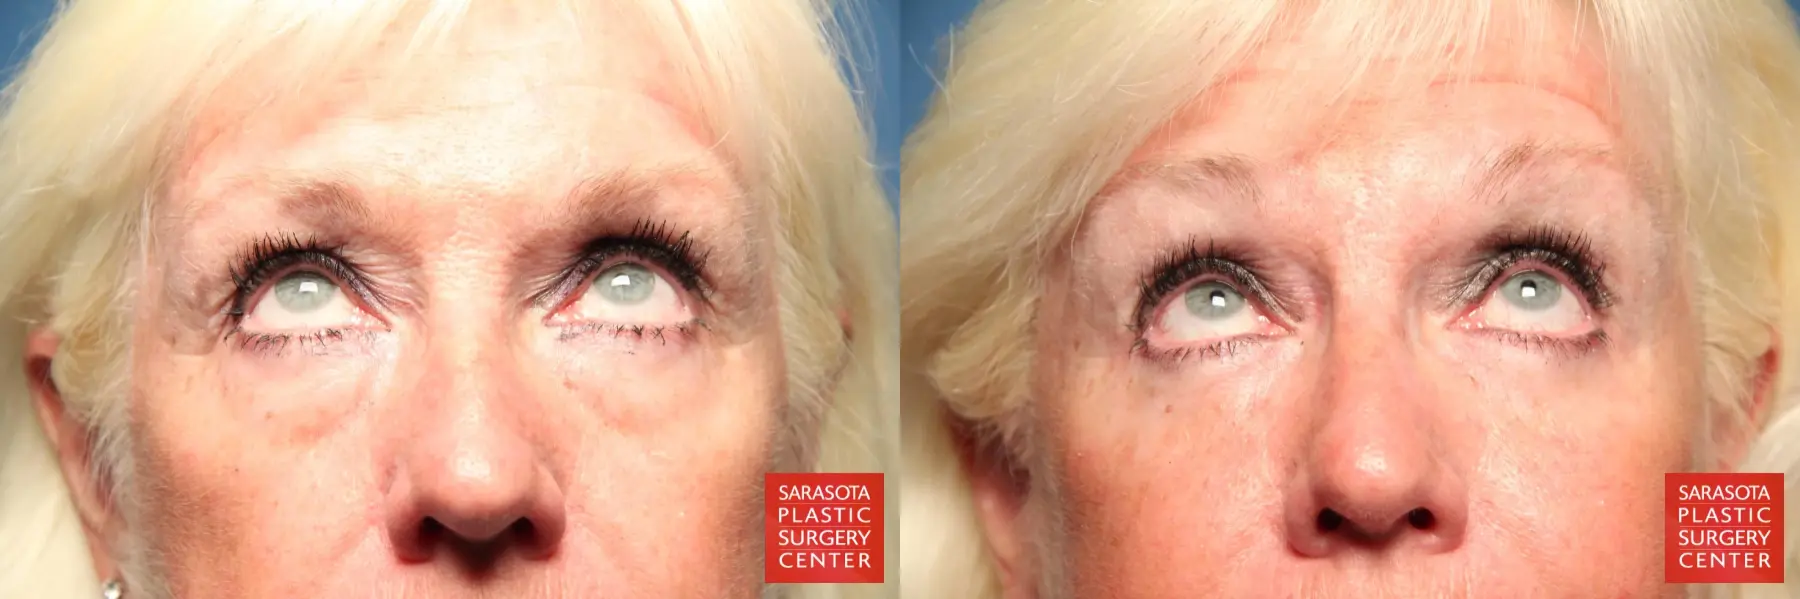 Eyelid Surgery: Patient 1 - Before and After 3